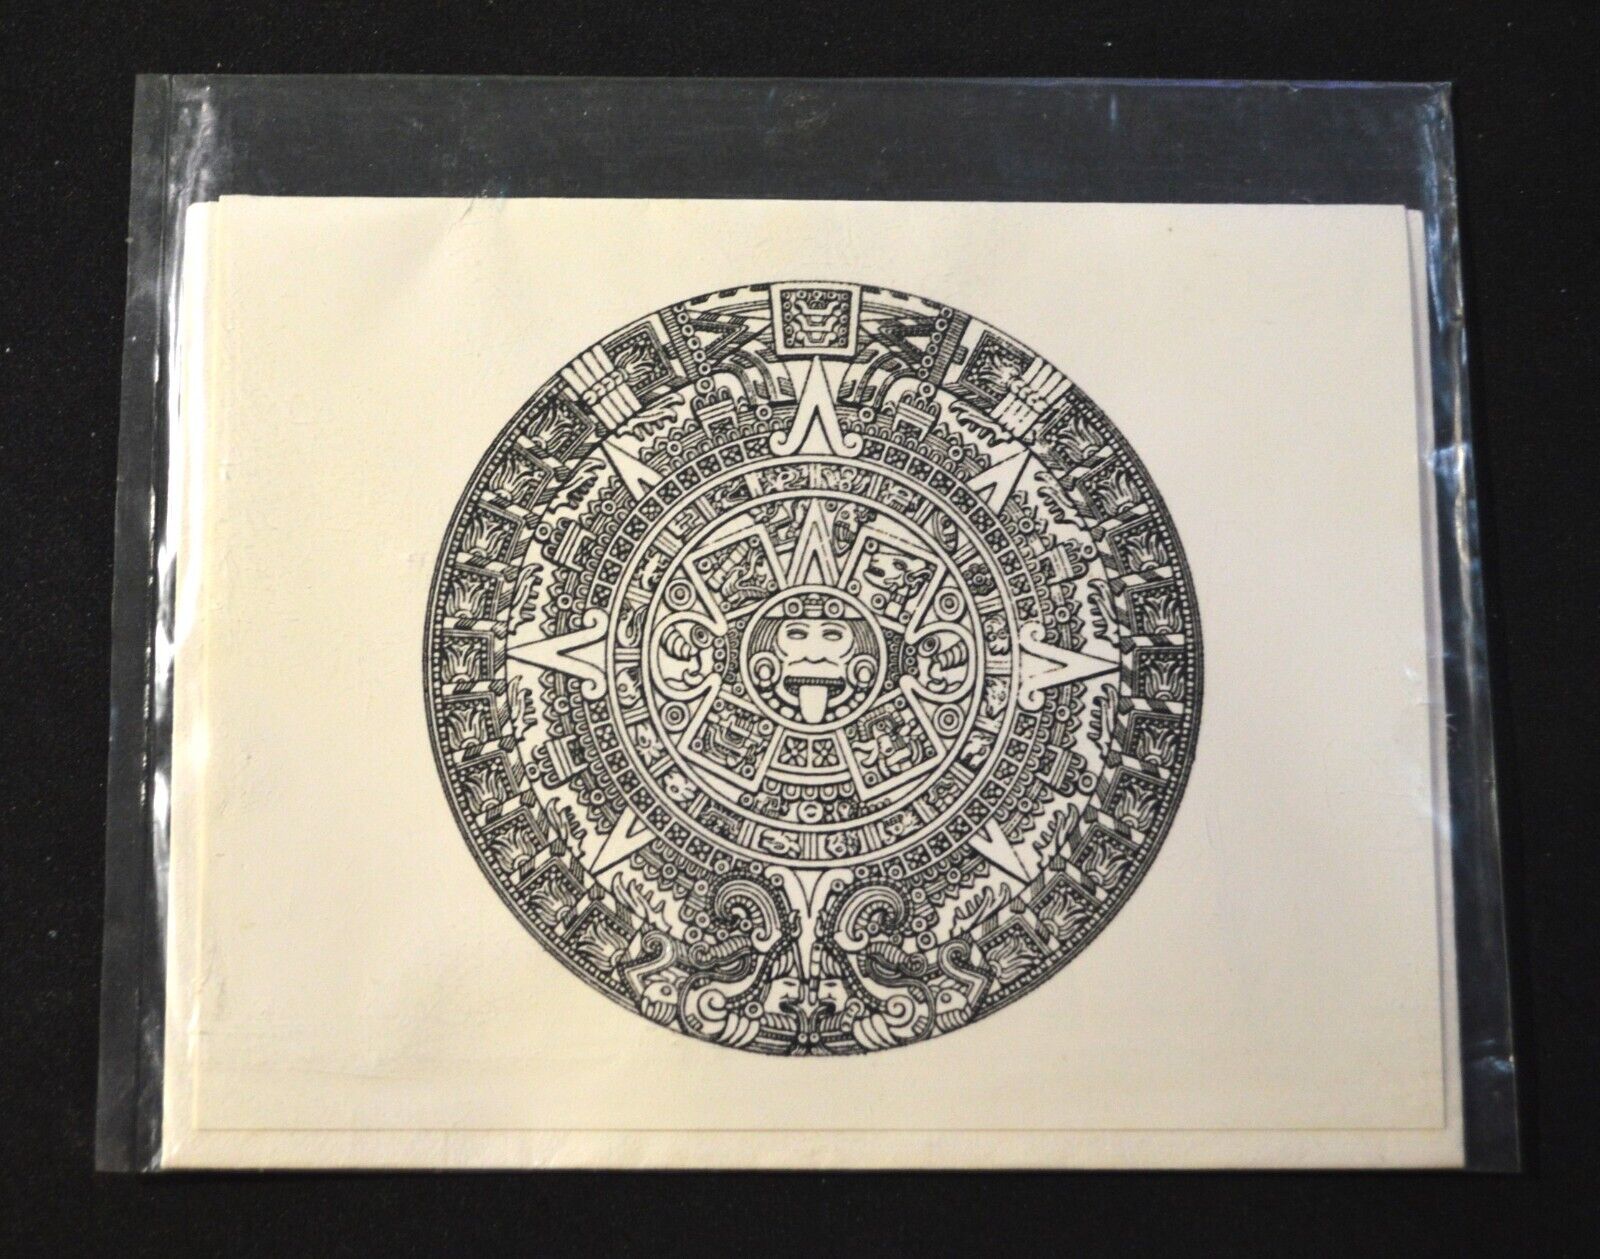 Aztec Calendar Stone Notecard Blank w/ Envelope by Handsome Prints Thermography